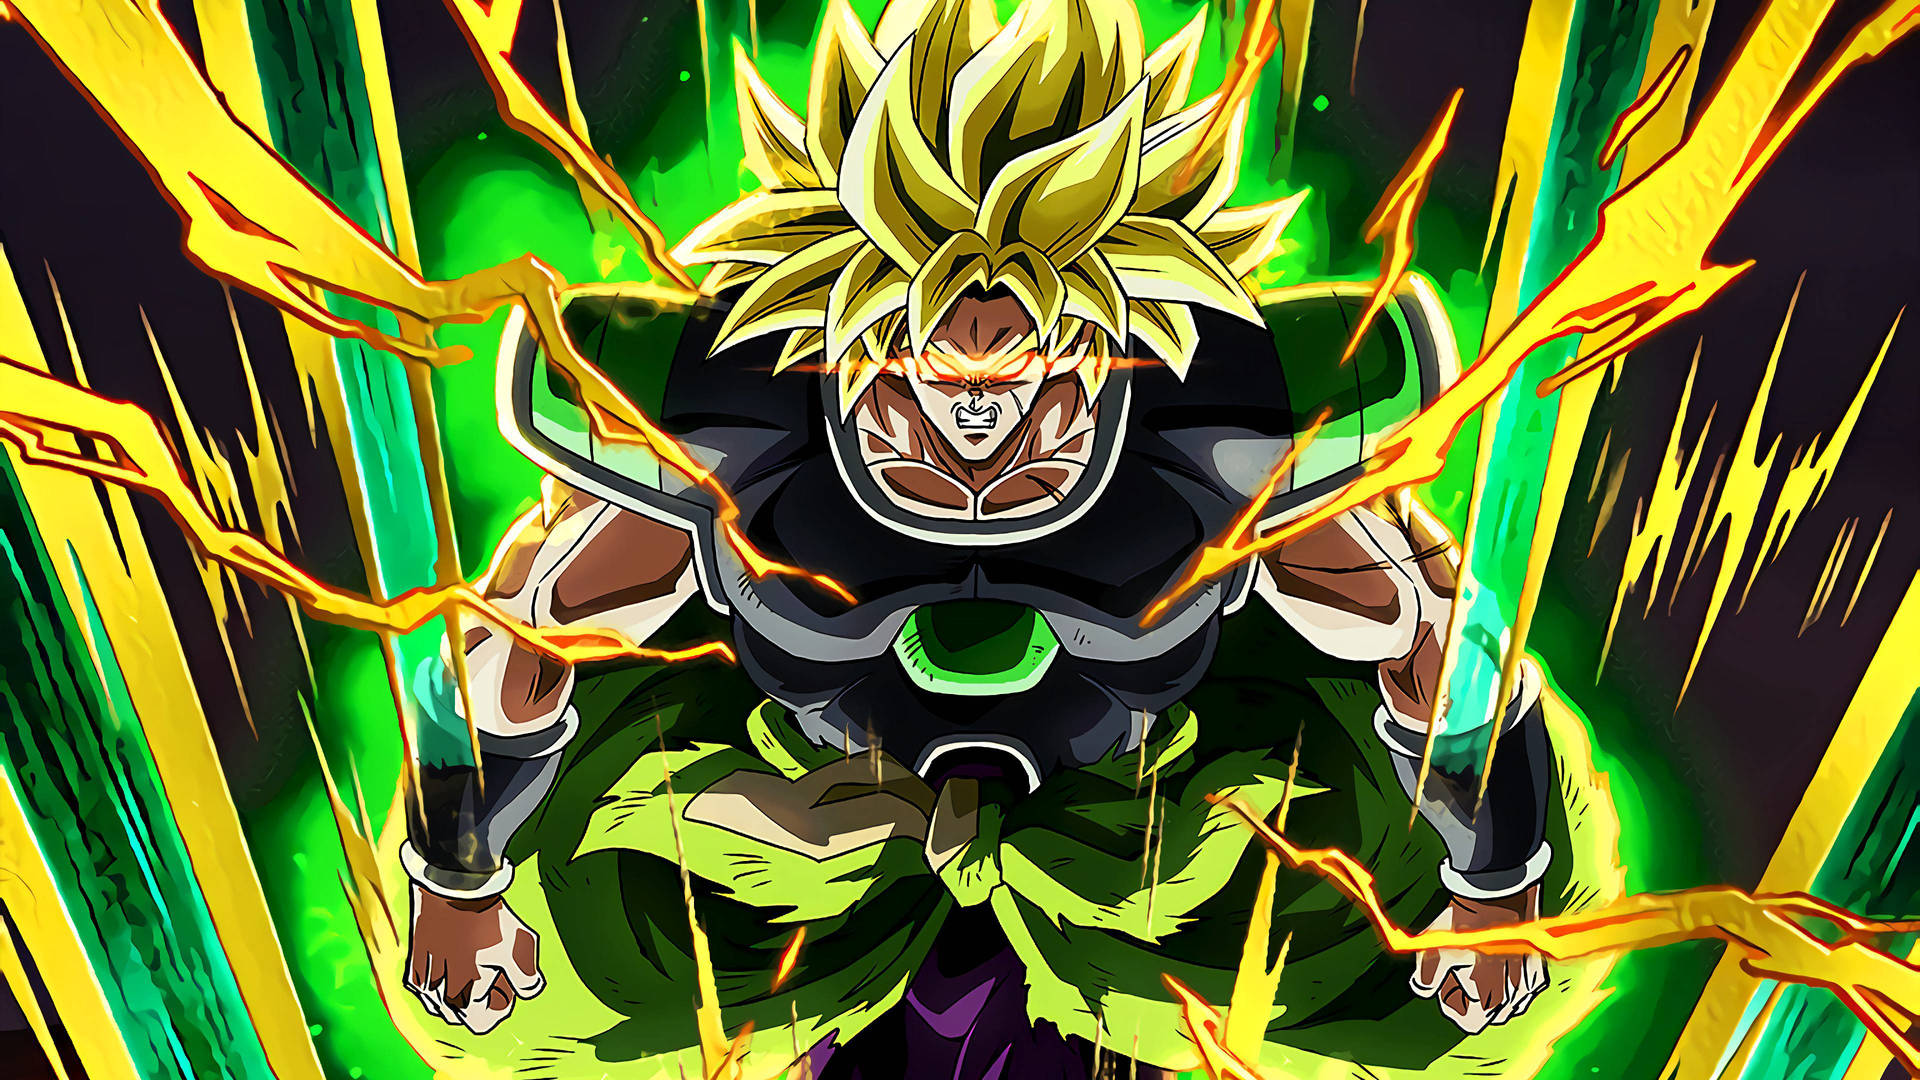 Broly's Rage Dragon Ball Super Broly Background